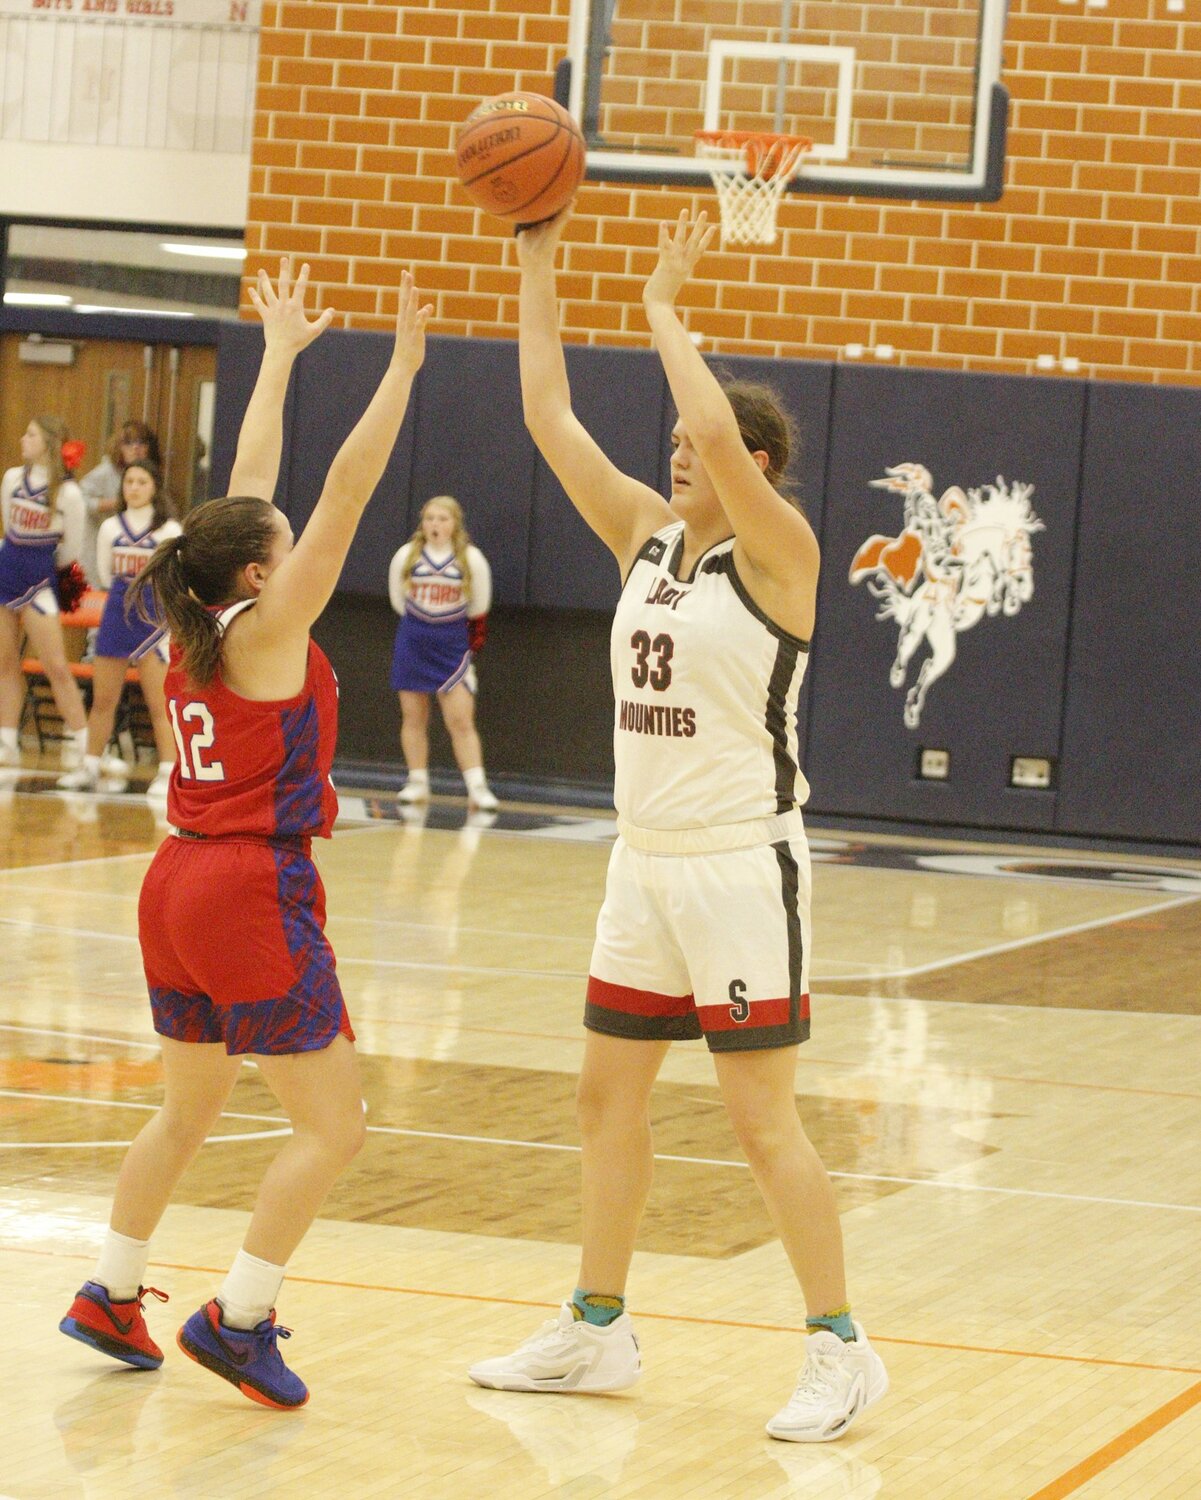 Freshman Layla Gomez has was stellar for the Mounties against Western Boone on Friday. She led all scorers with 23 points and added 10 rebounds to lead South to a 61-47 win.